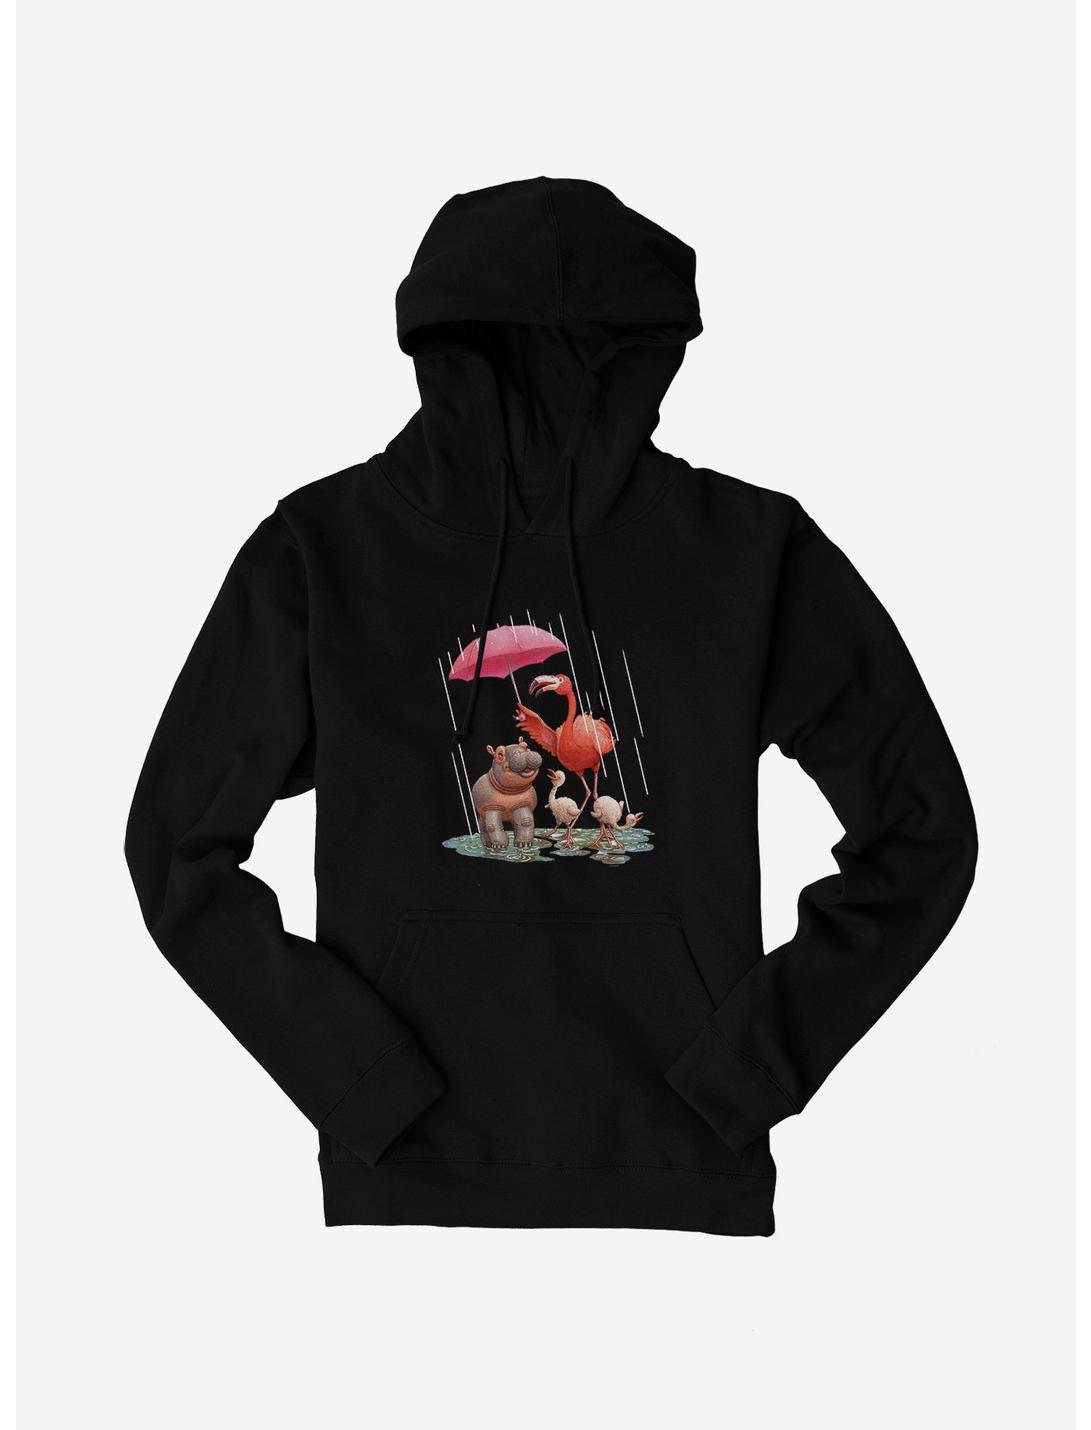 Fiona The Hippo Valentine's Day Staying Dry Hoodie, , hi-res